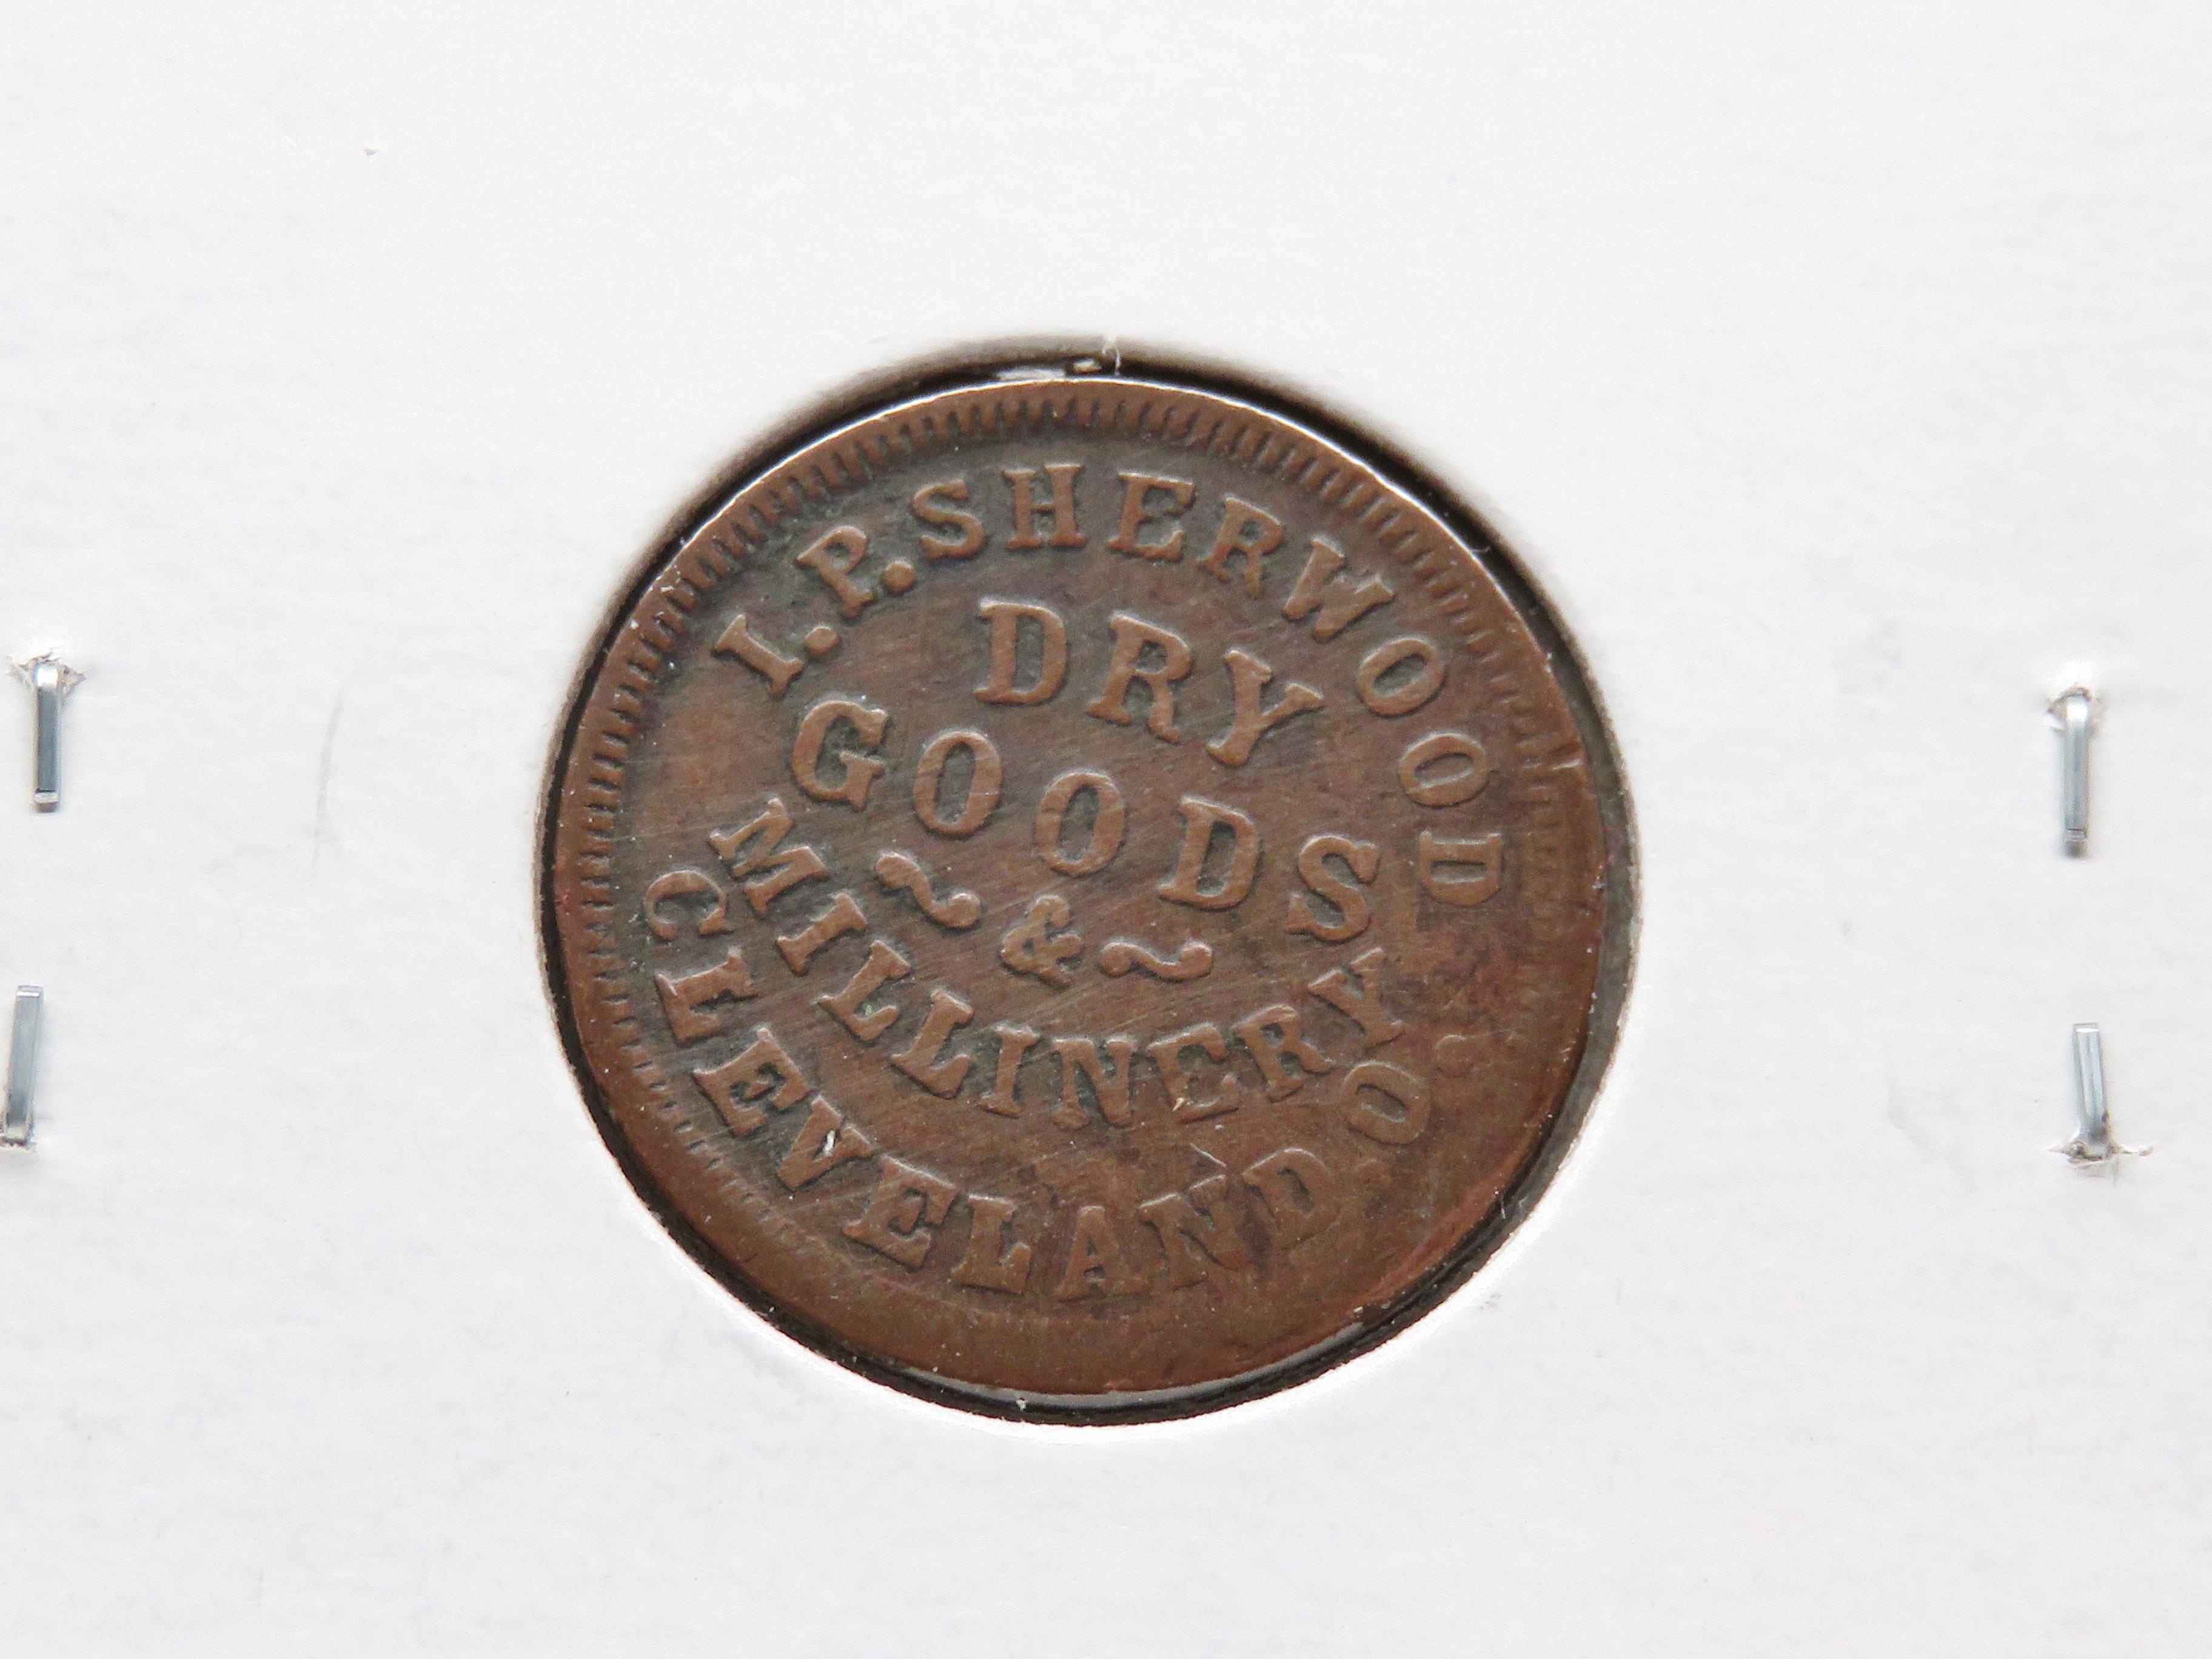 1863 Civil War Token IP Sherwood Dry Goods & Millinery Cleveland OH, R5, rotated rev